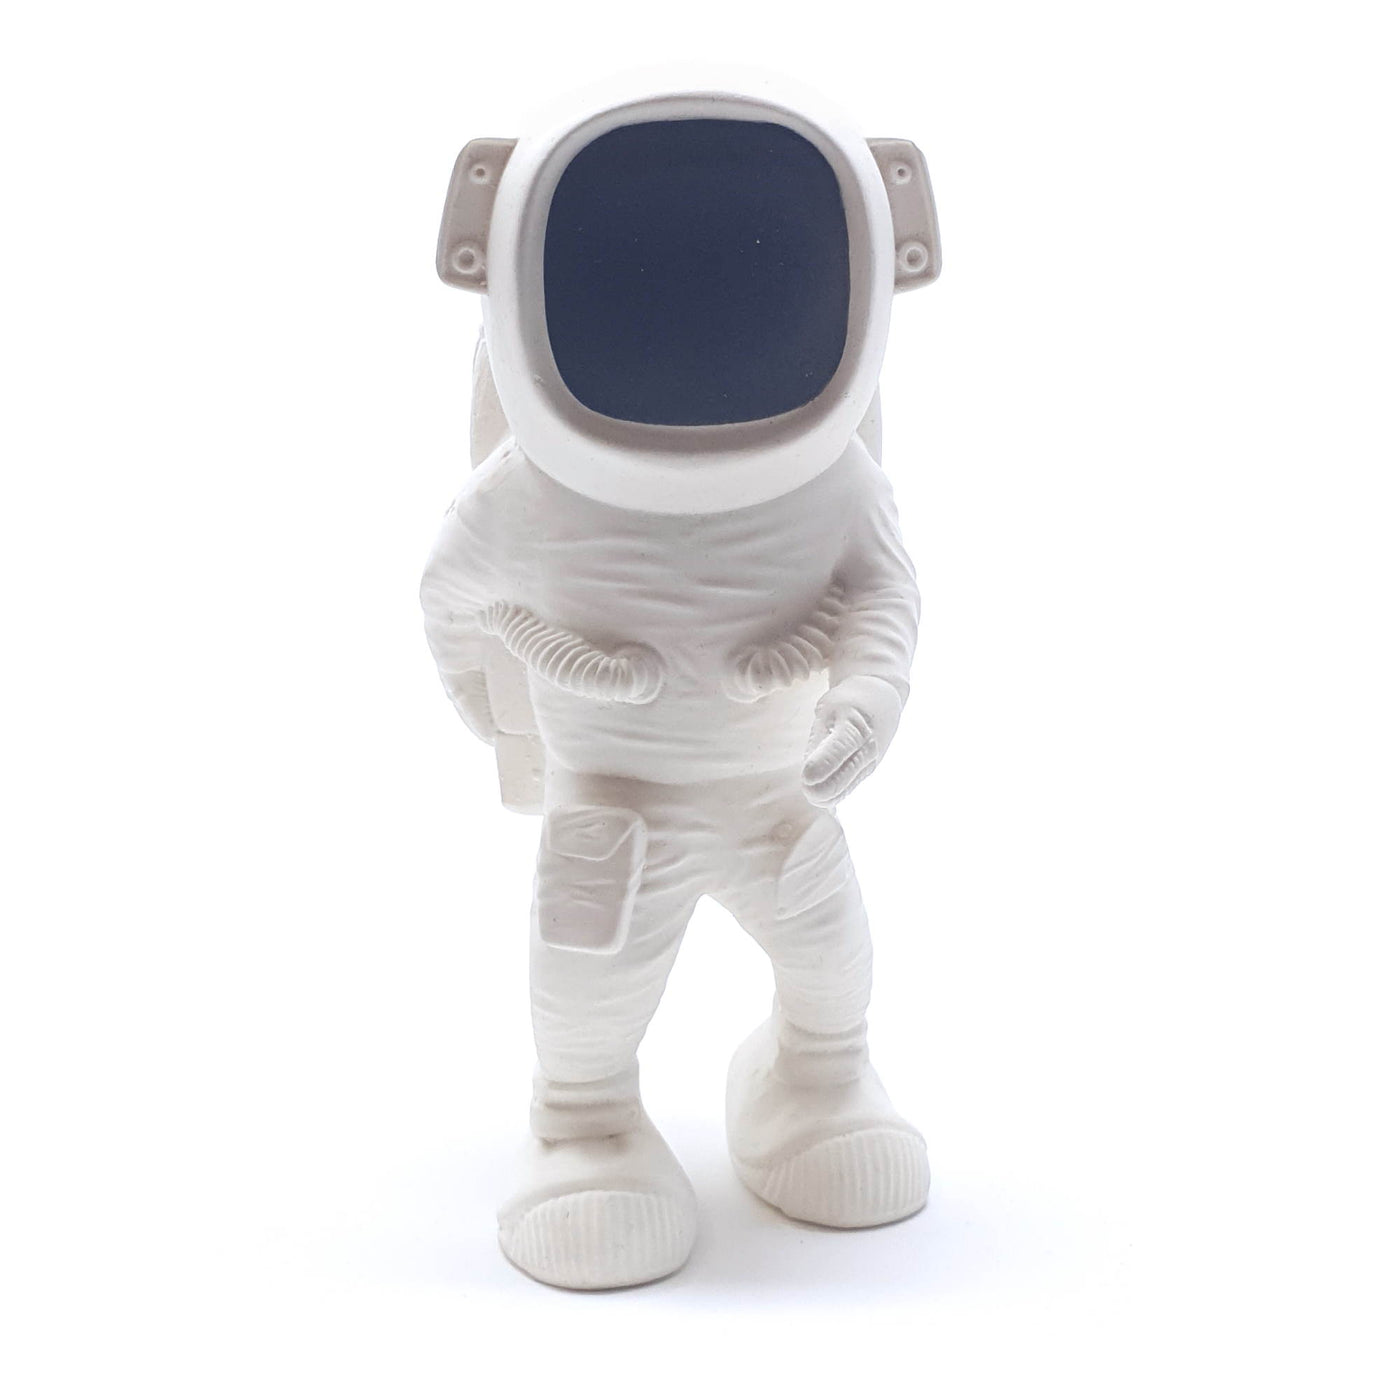 AstroGNAW astronaut natural rubber space themed baby toy for sensory play